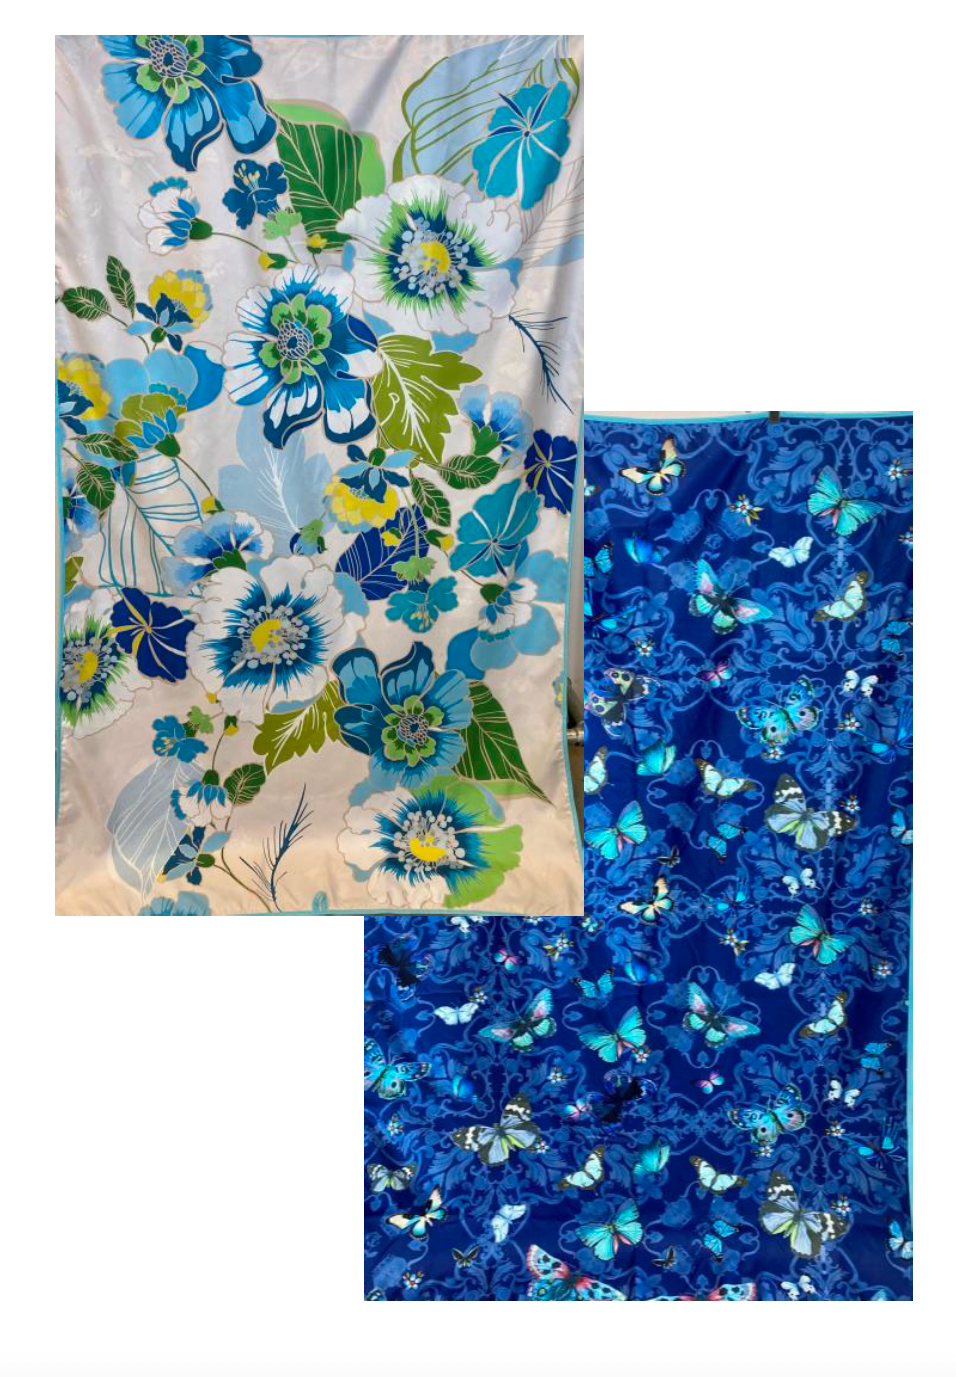 Johnny Was Jenn beach towel with blue and green and yellow florals and blue butterfly pattern